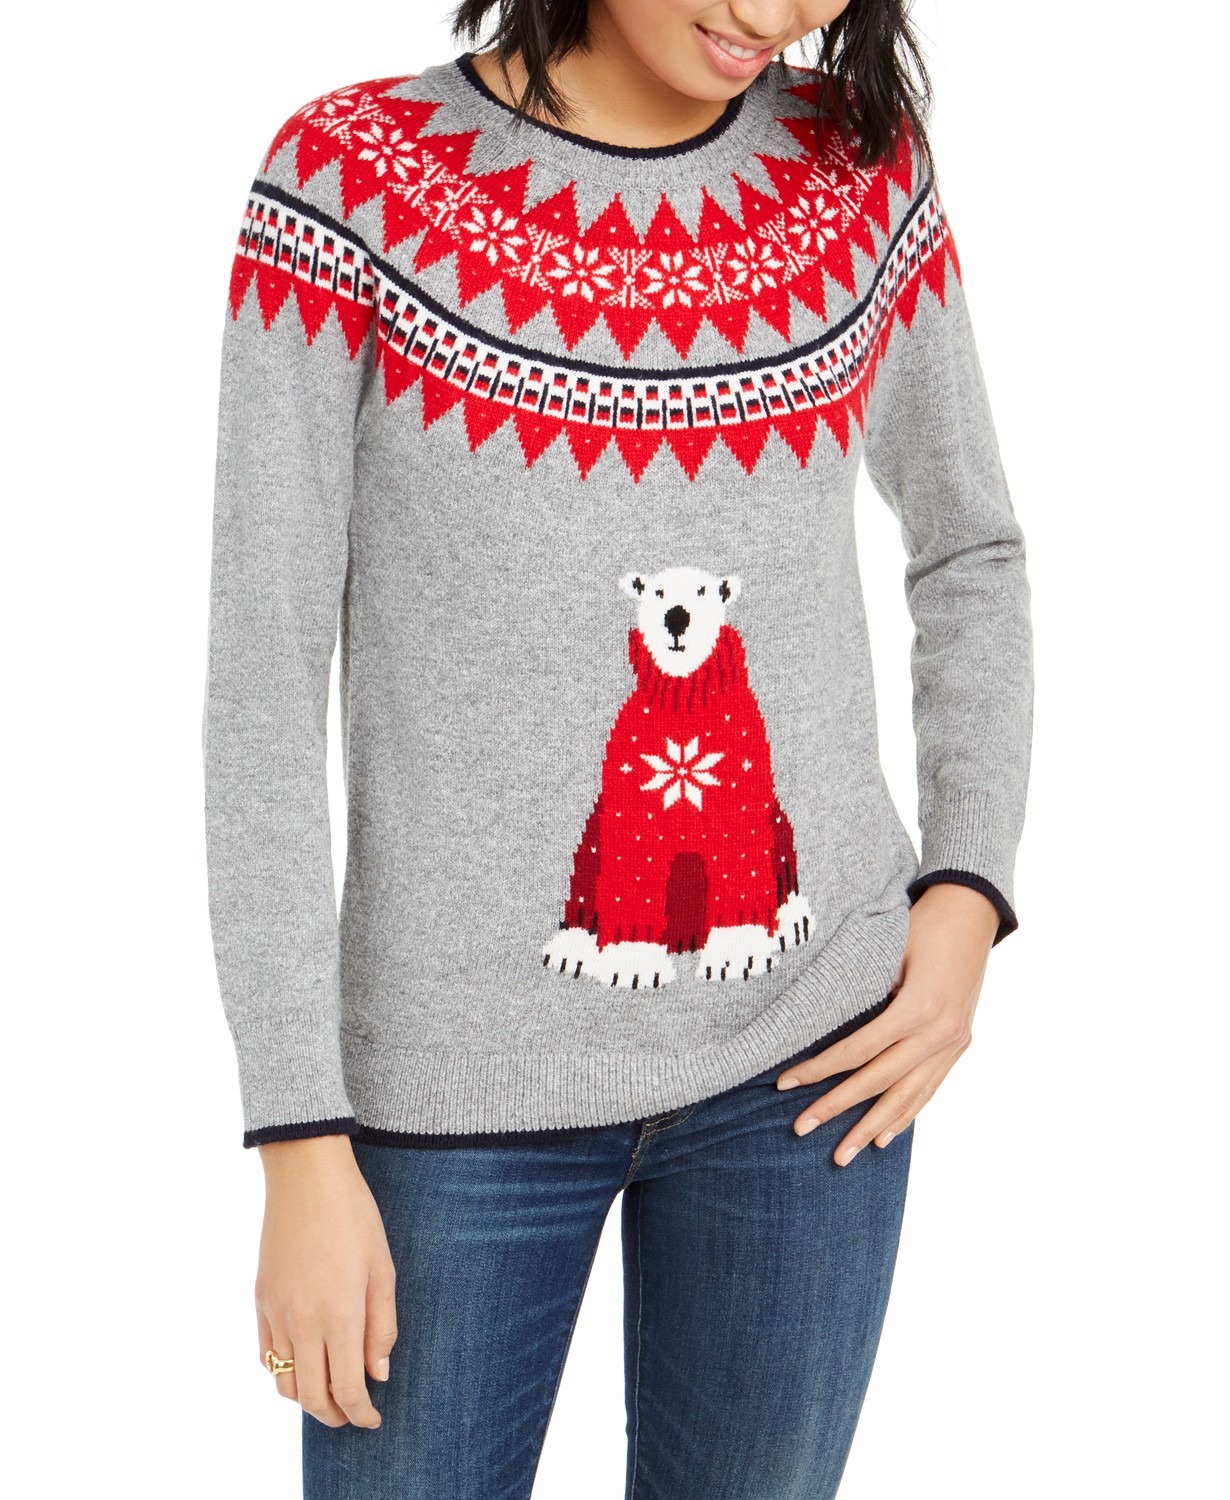 12 Awesome Christmas Sweaters! 157